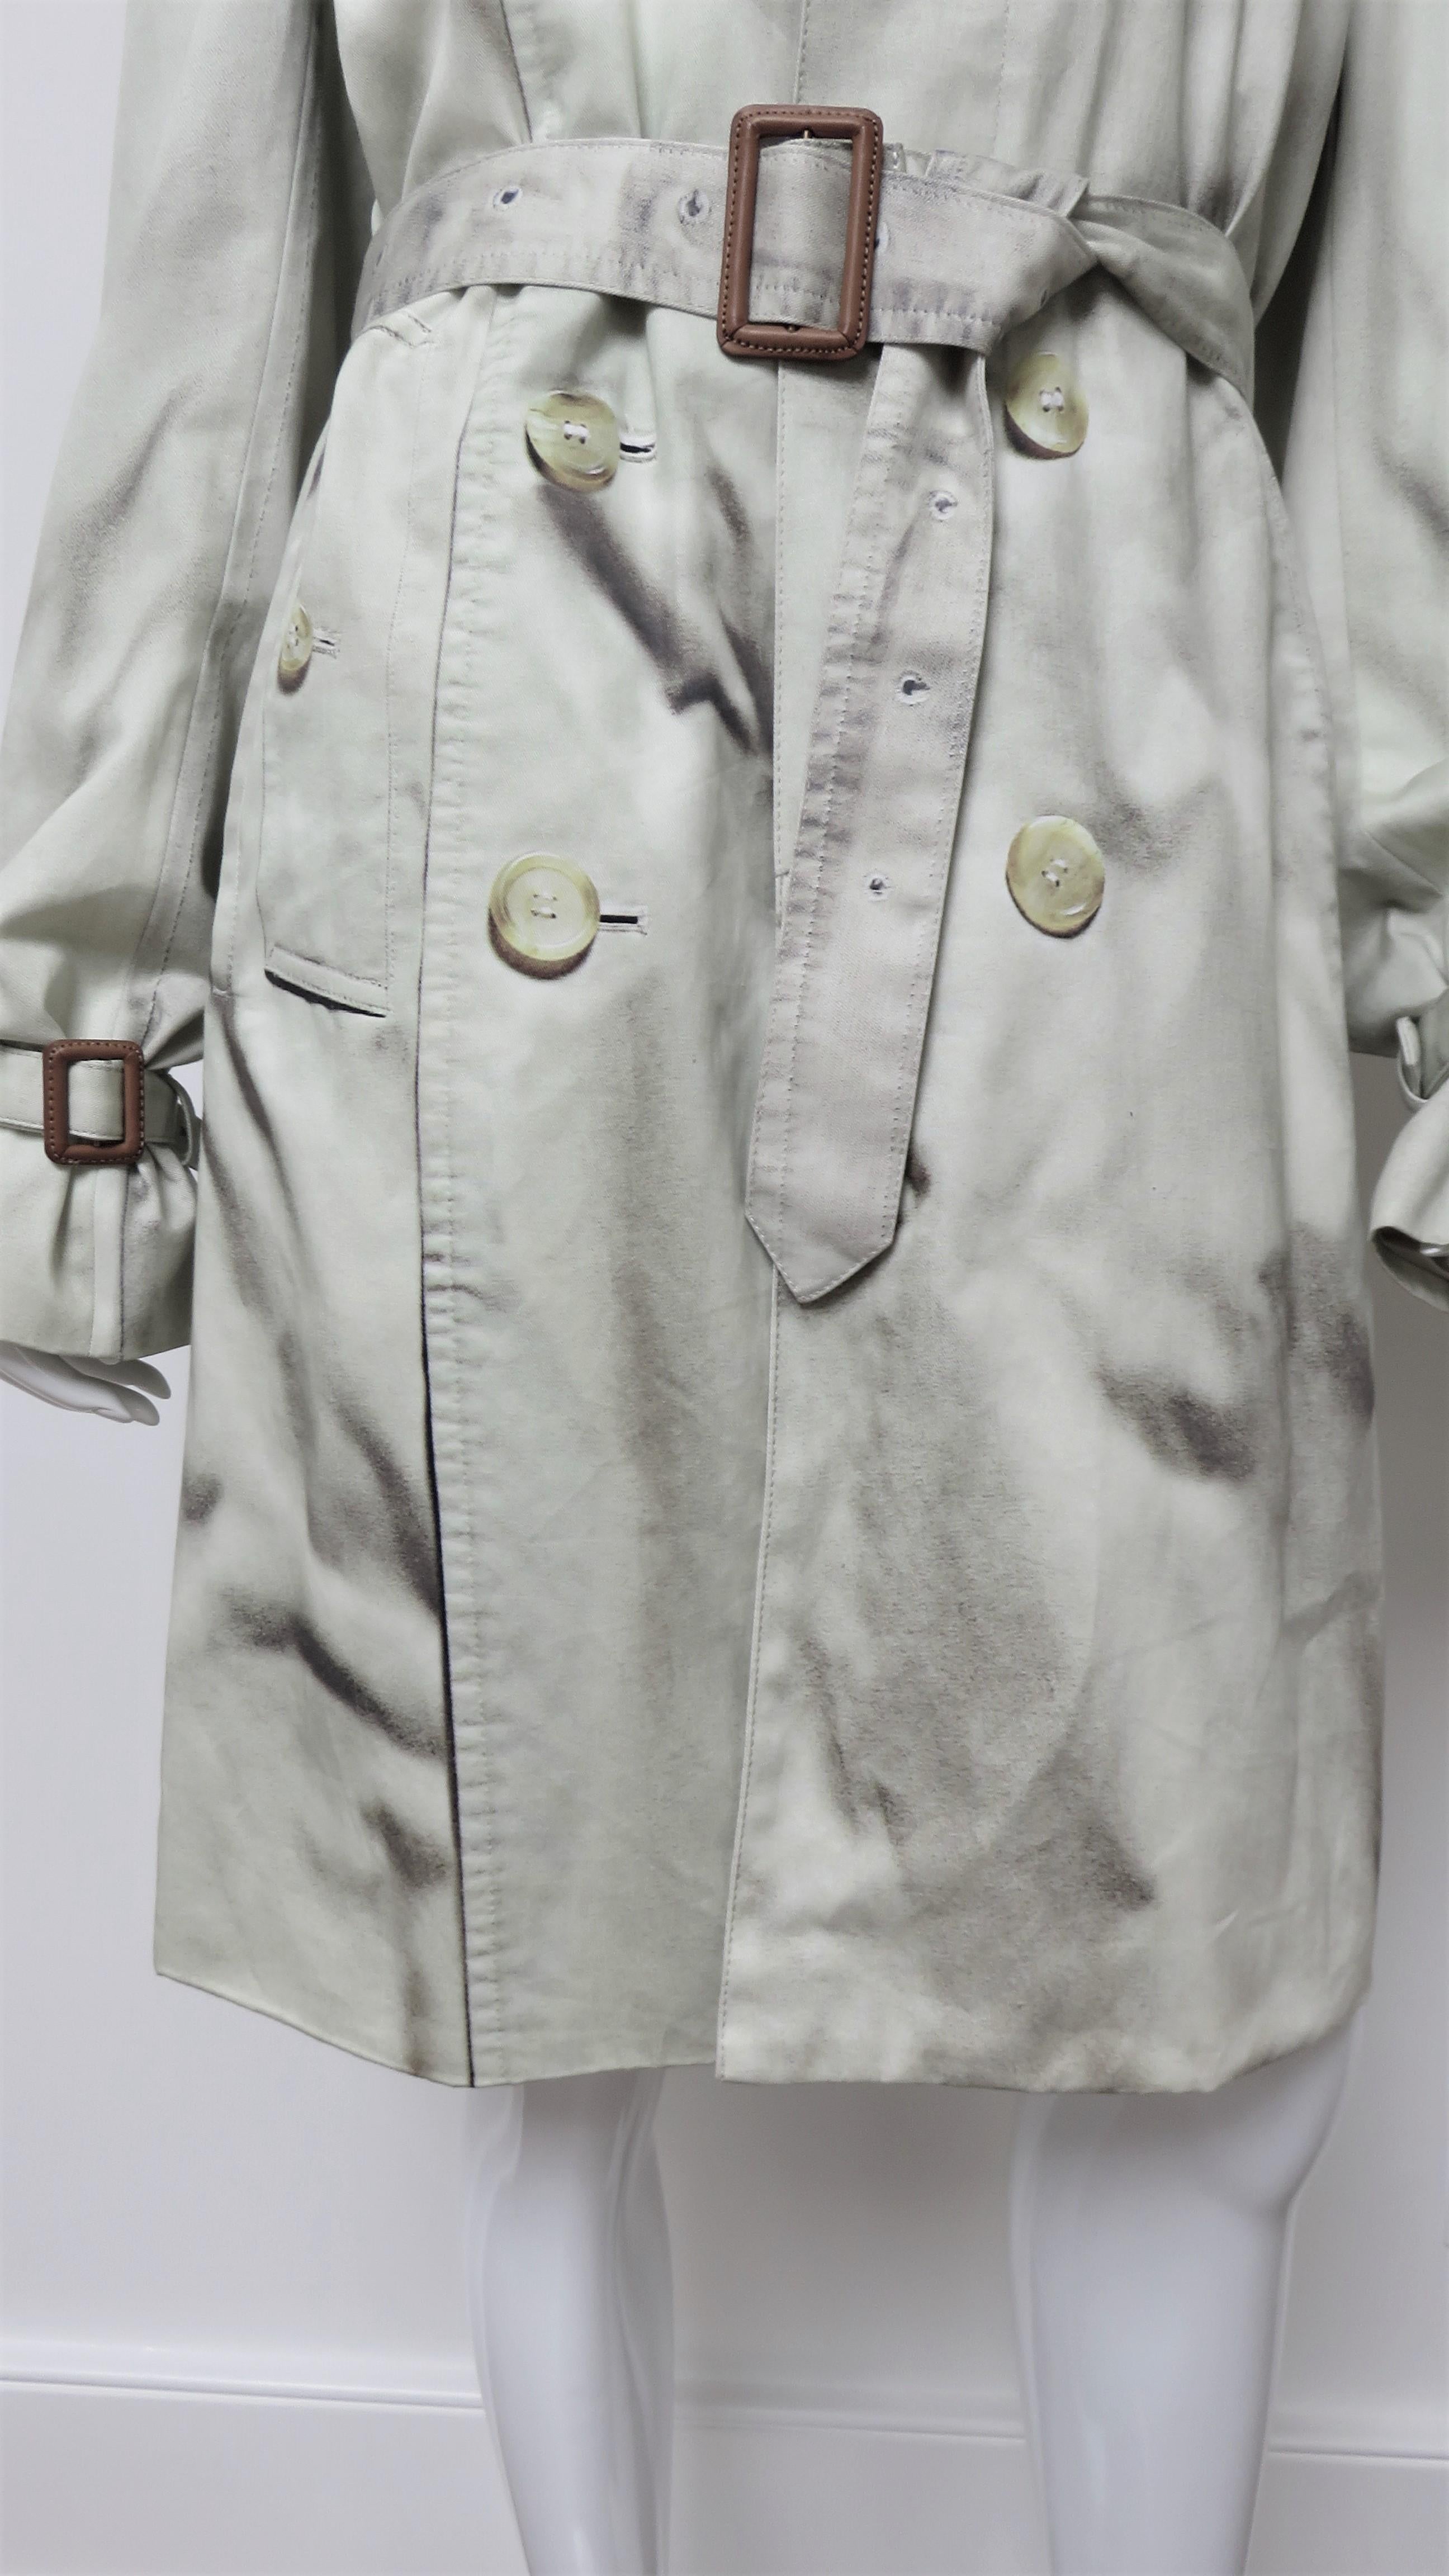 Trompe L'oeil Oversize Belted Trench Coat In Good Condition For Sale In Water Mill, NY